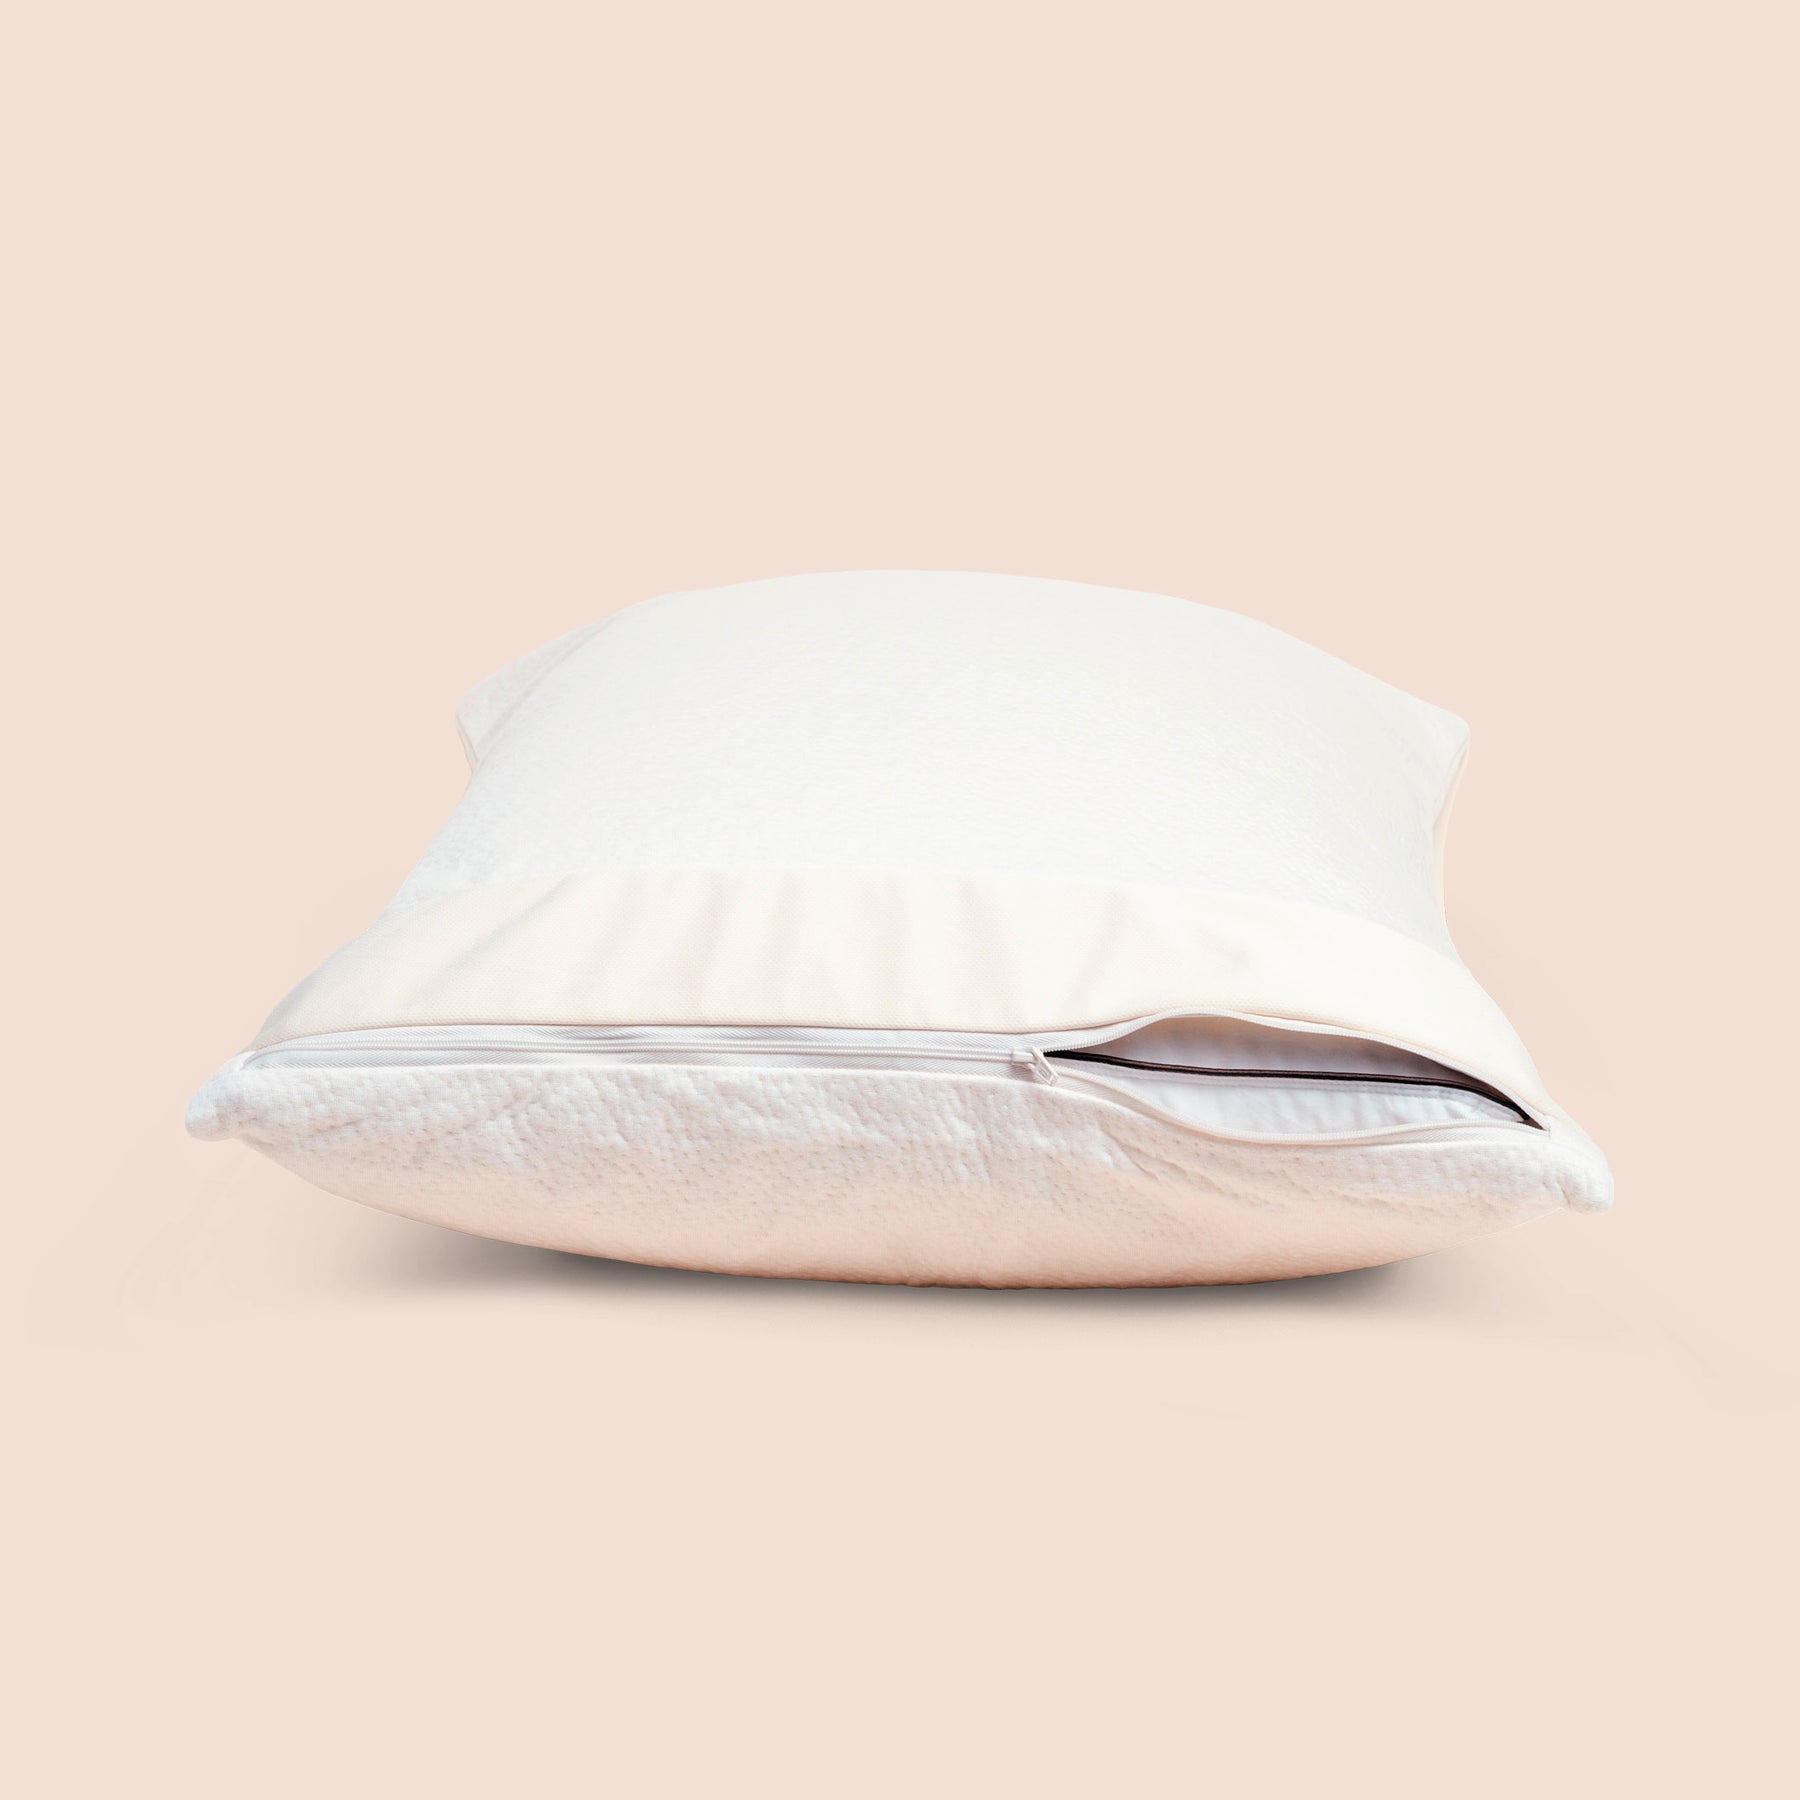 Side view image of the Signature Pillow Protector on a pillow with the zipper slightly open